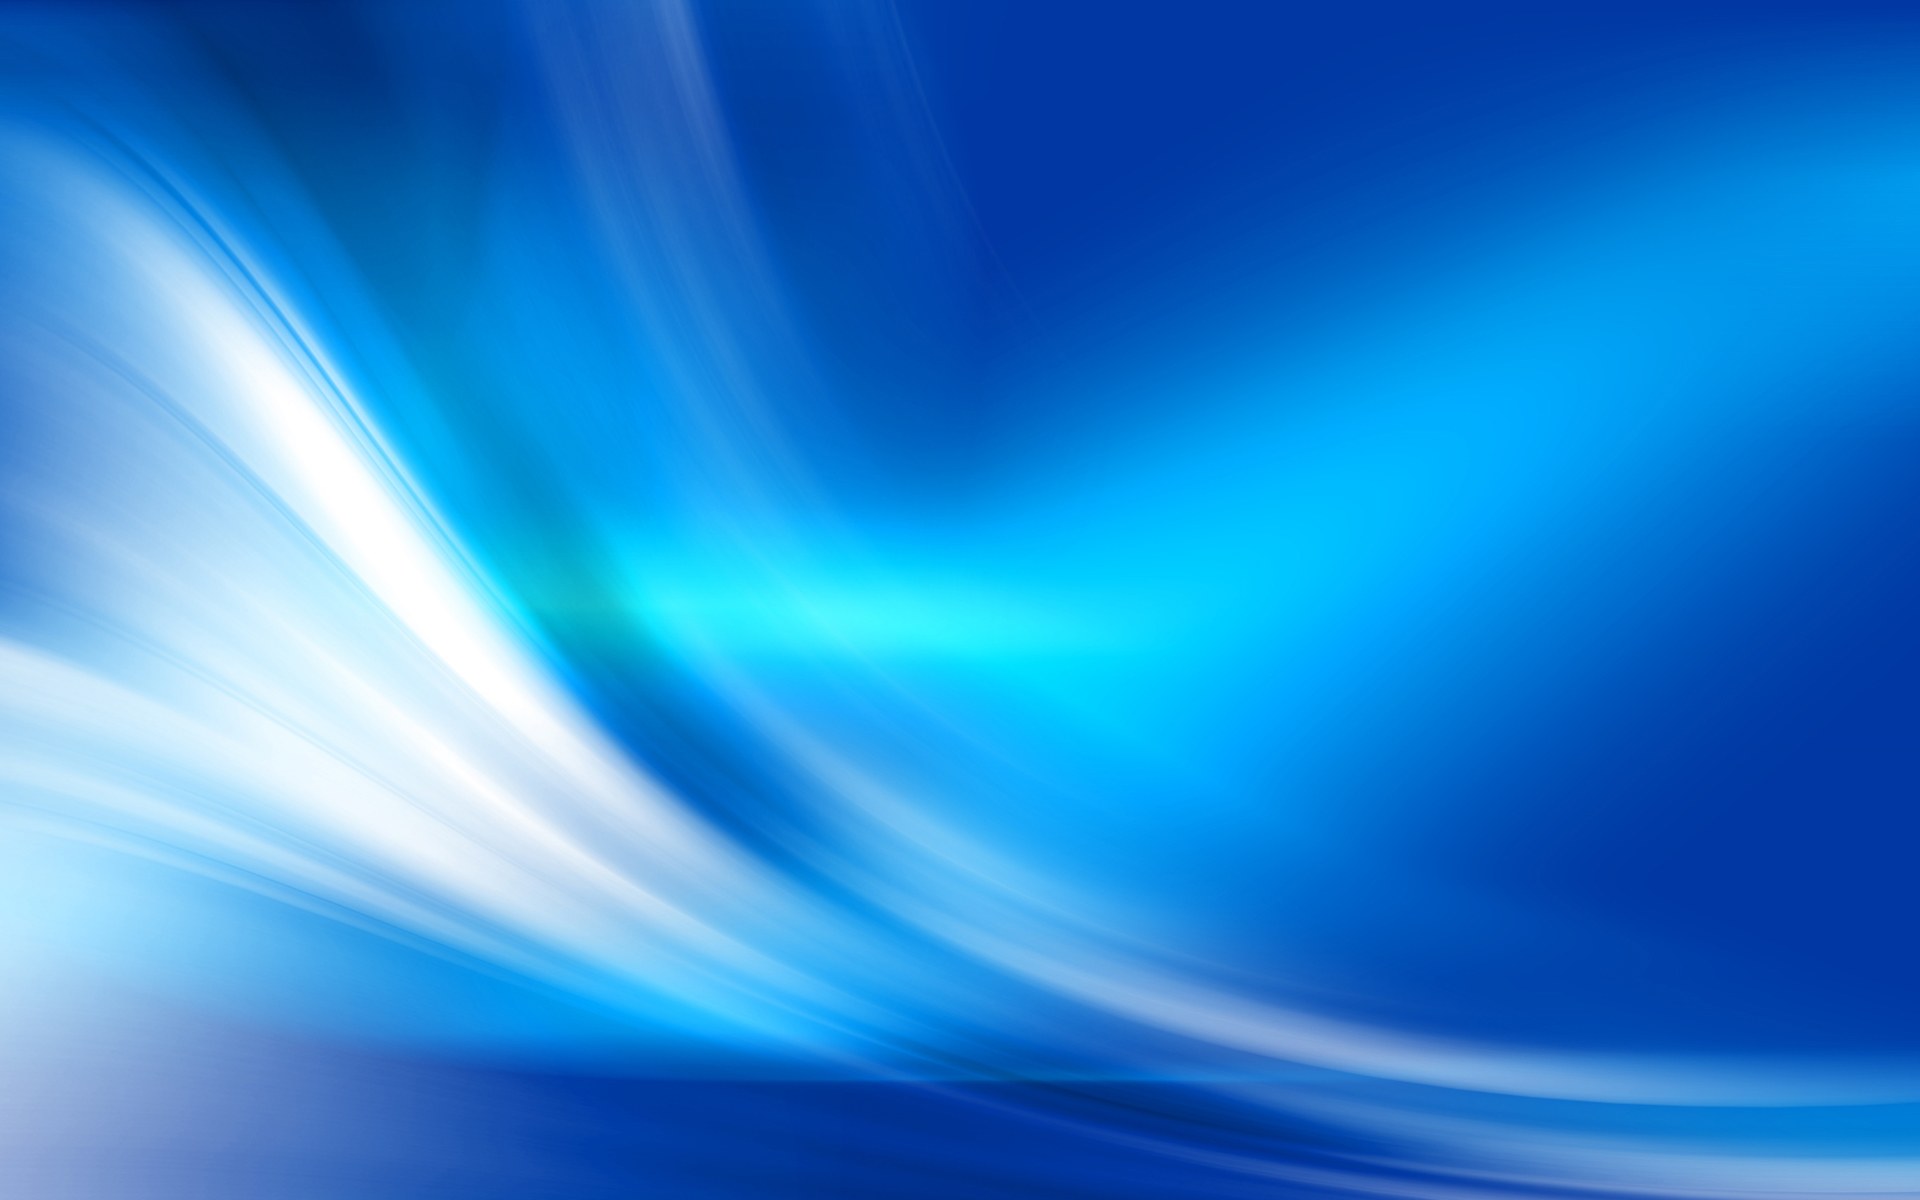 Awesome Blue Background HD Wallpaper Free Download